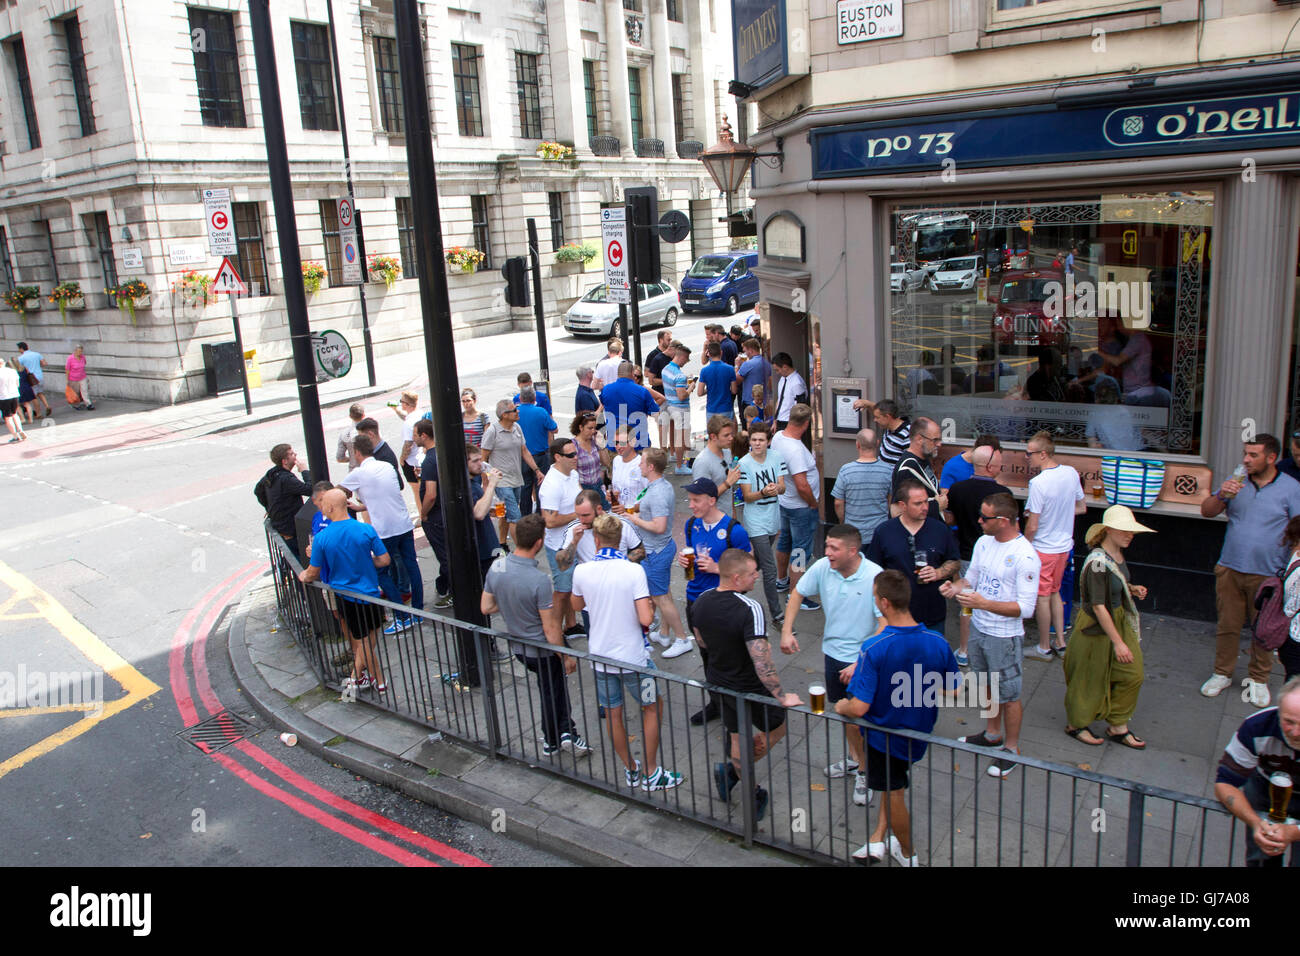 Leicester City football fans drinking in pub outside on Euston Road in Central London 7th August 2016 before FA Community Shield Stock Photo